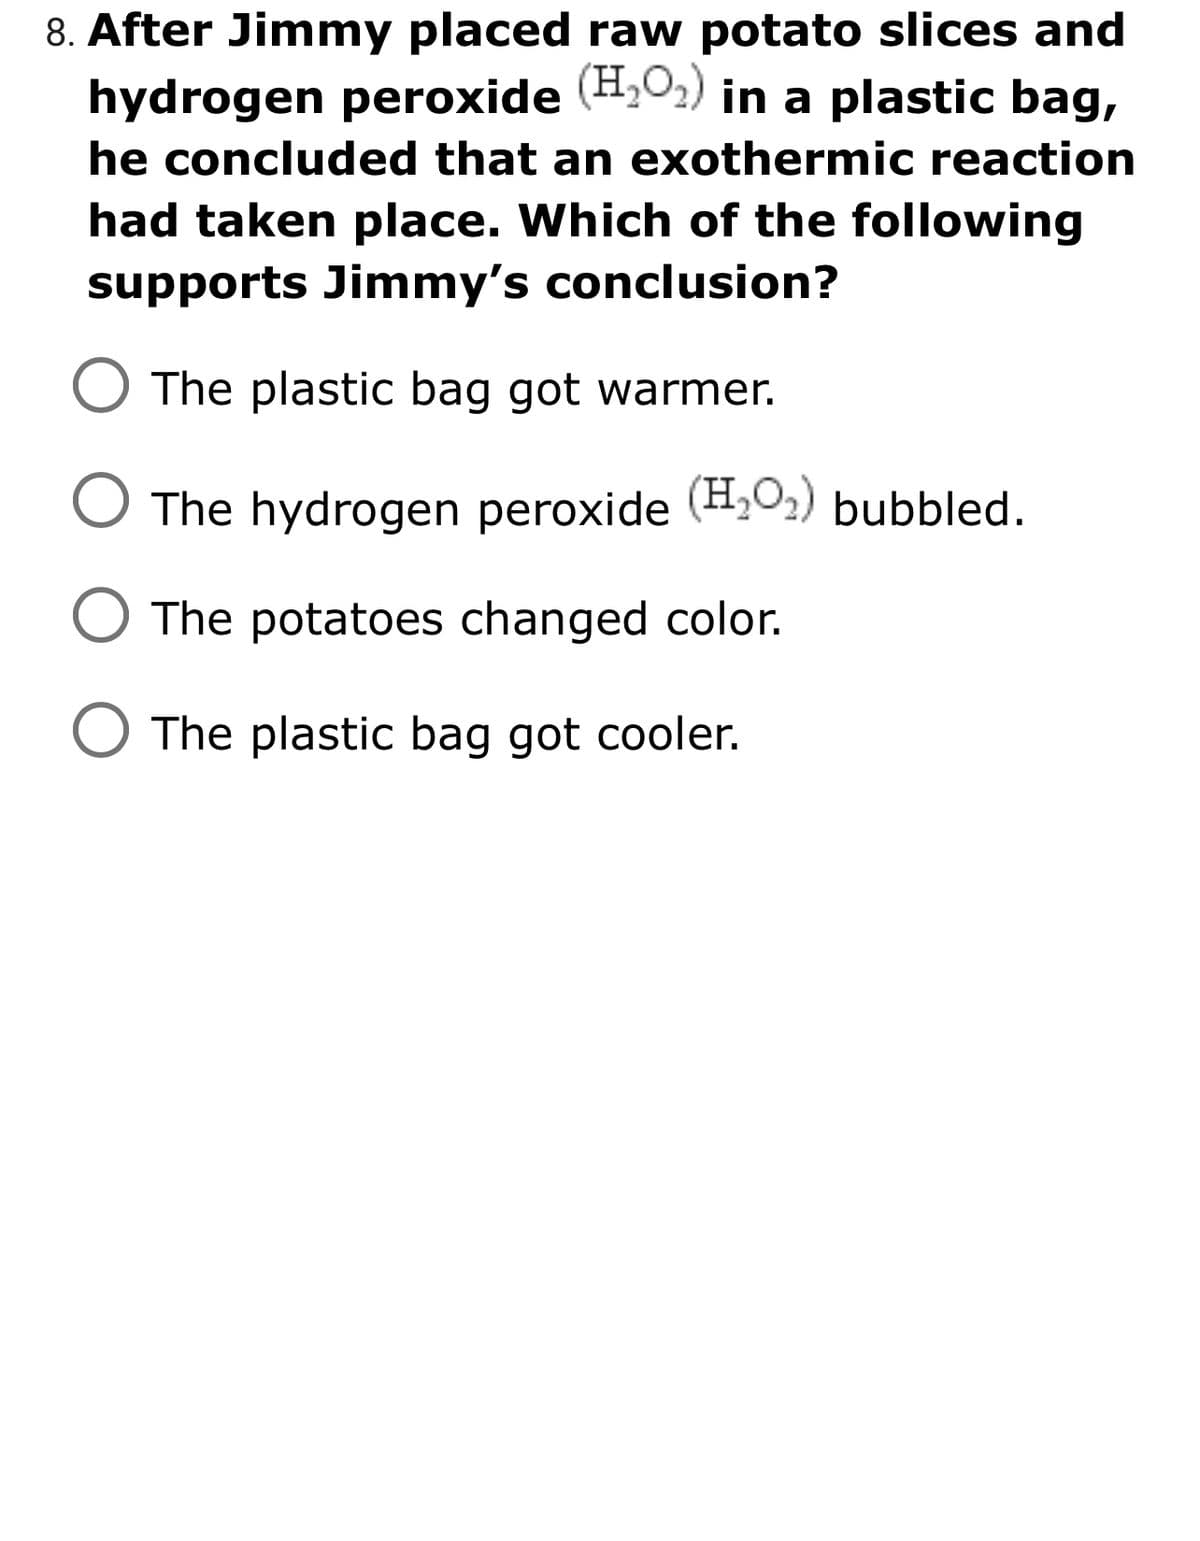 8. After Jimmy placed raw potato slices and
hydrogen peroxide (H,02) in a plastic bag,
he concluded that an exothermic reaction
had taken place. Which of the following
supports Jimmy's conclusion?
O The plastic bag got warmer.
The hydrogen peroxide (H,O2) bubbled.
The potatoes changed color.
The plastic bag got cooler.
